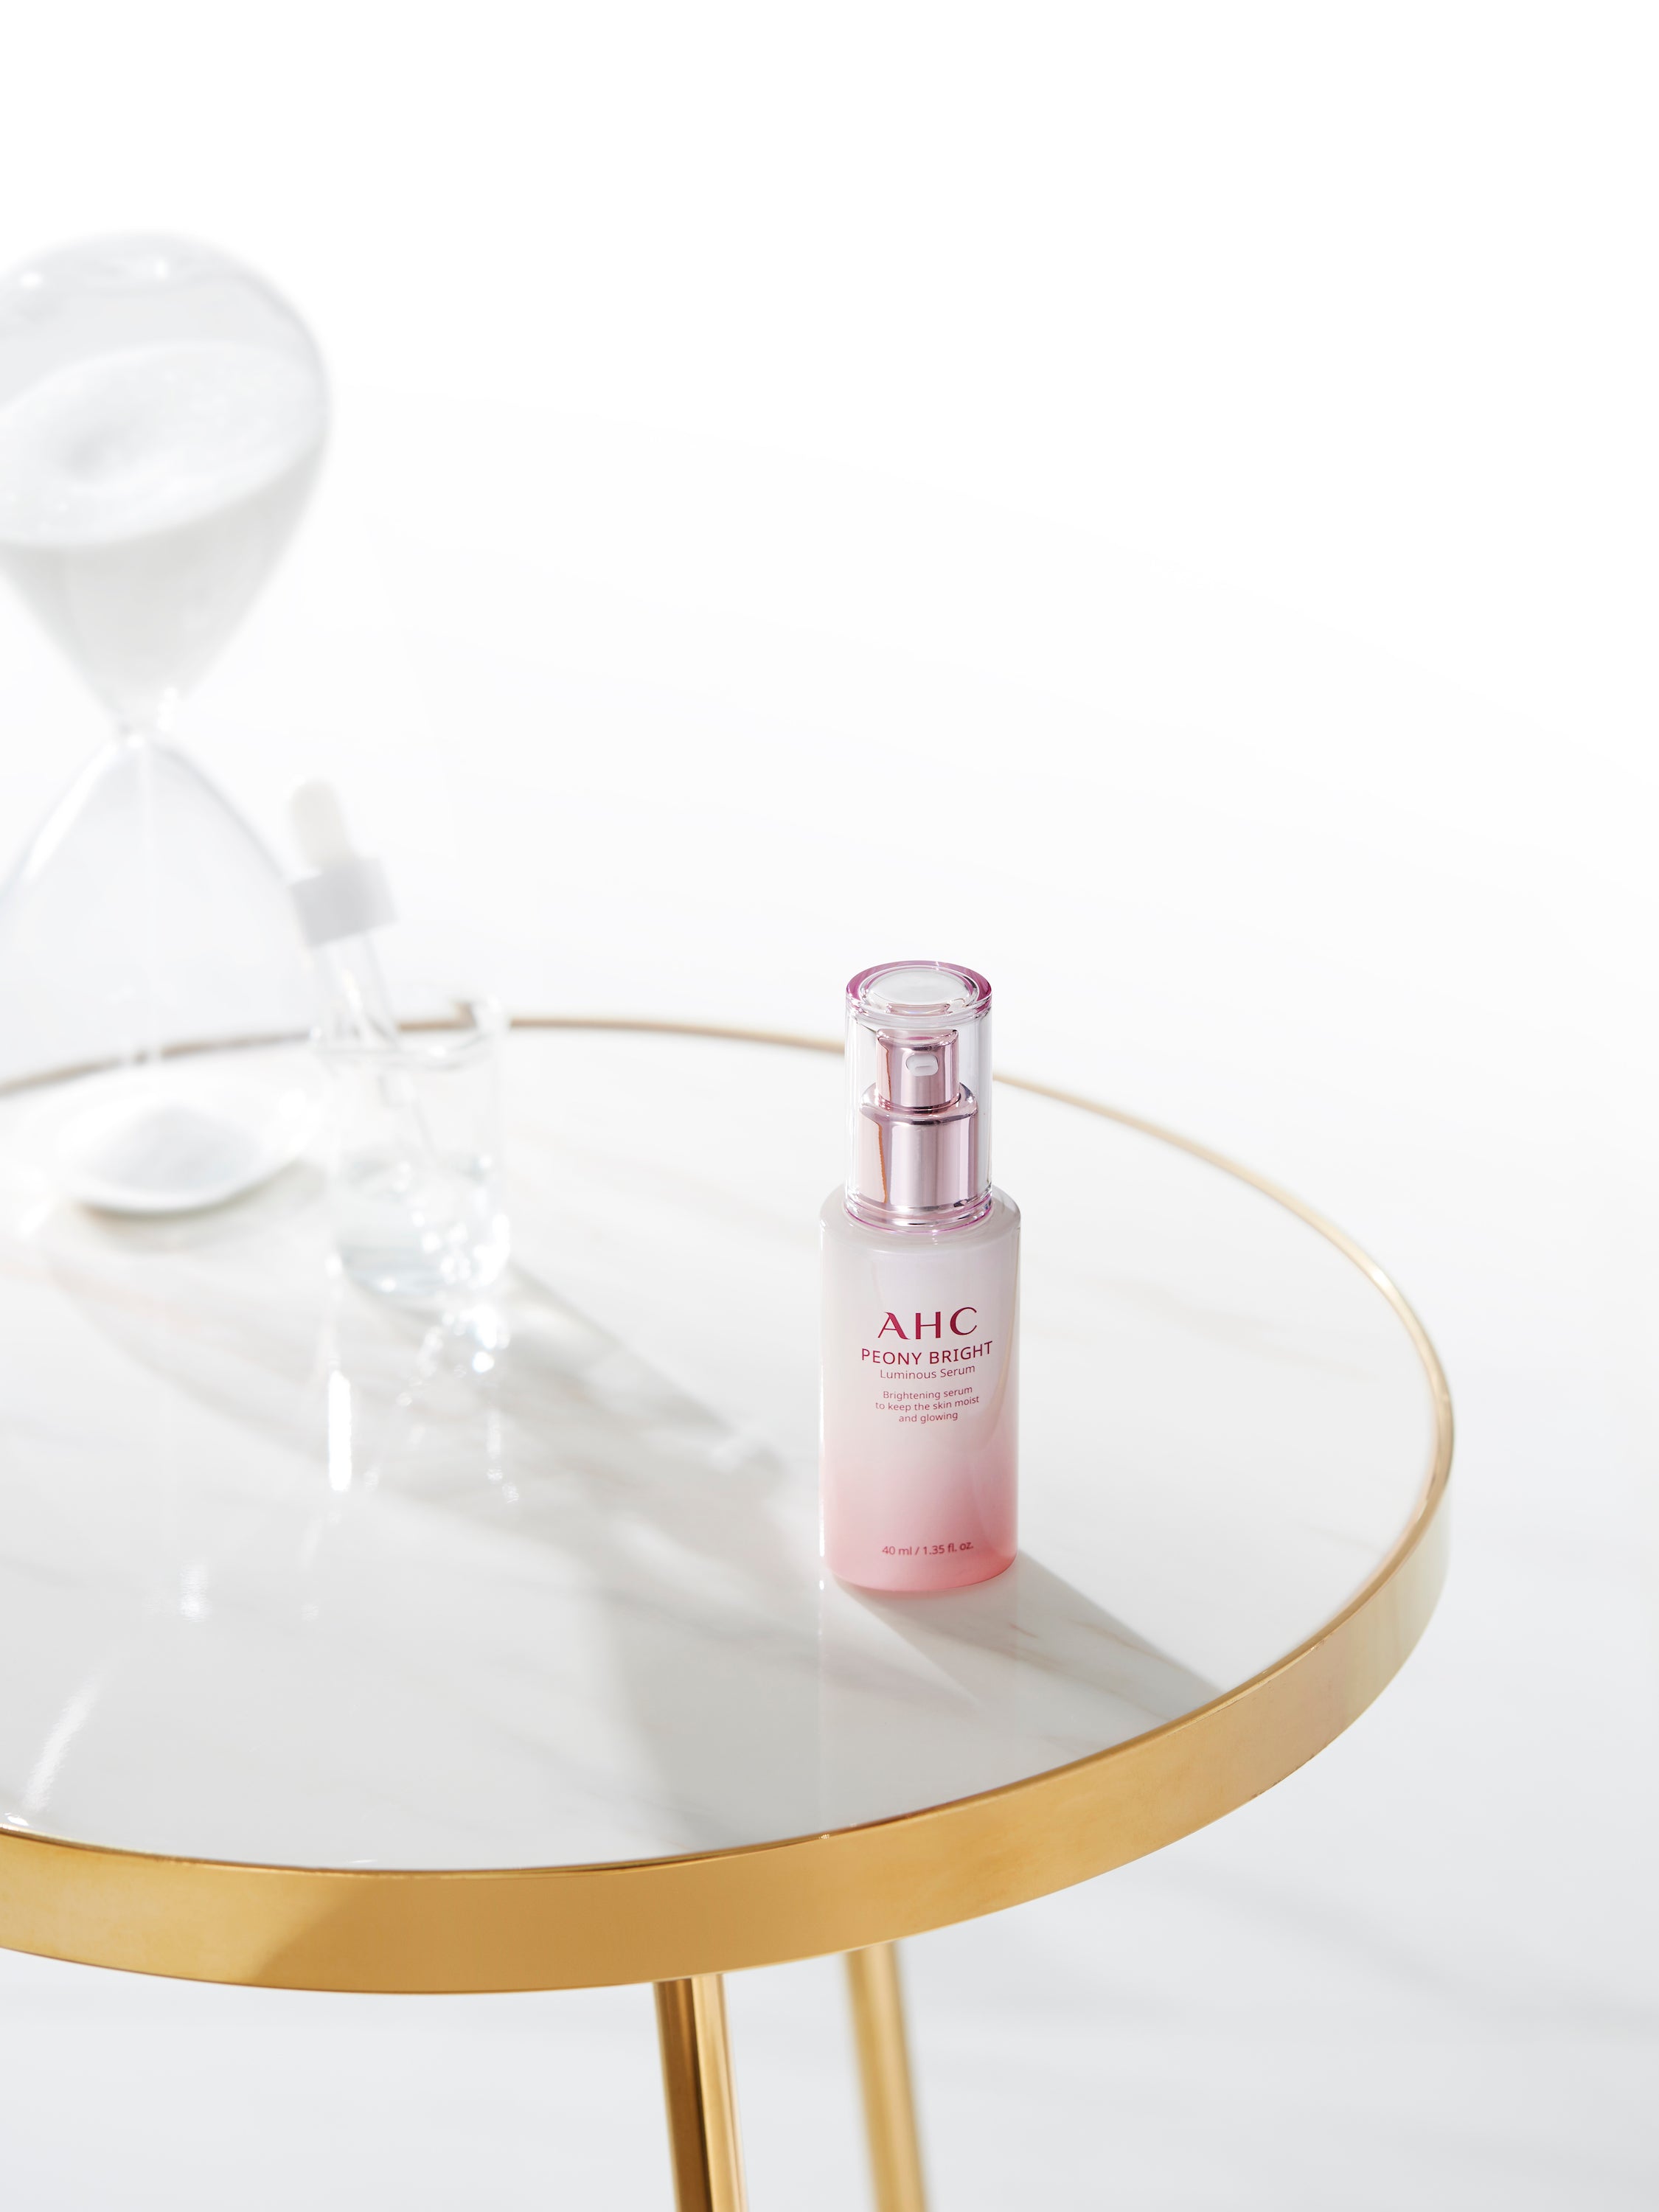 A packshot of AHC Peony Bright Luminous Serum on a white gold table.